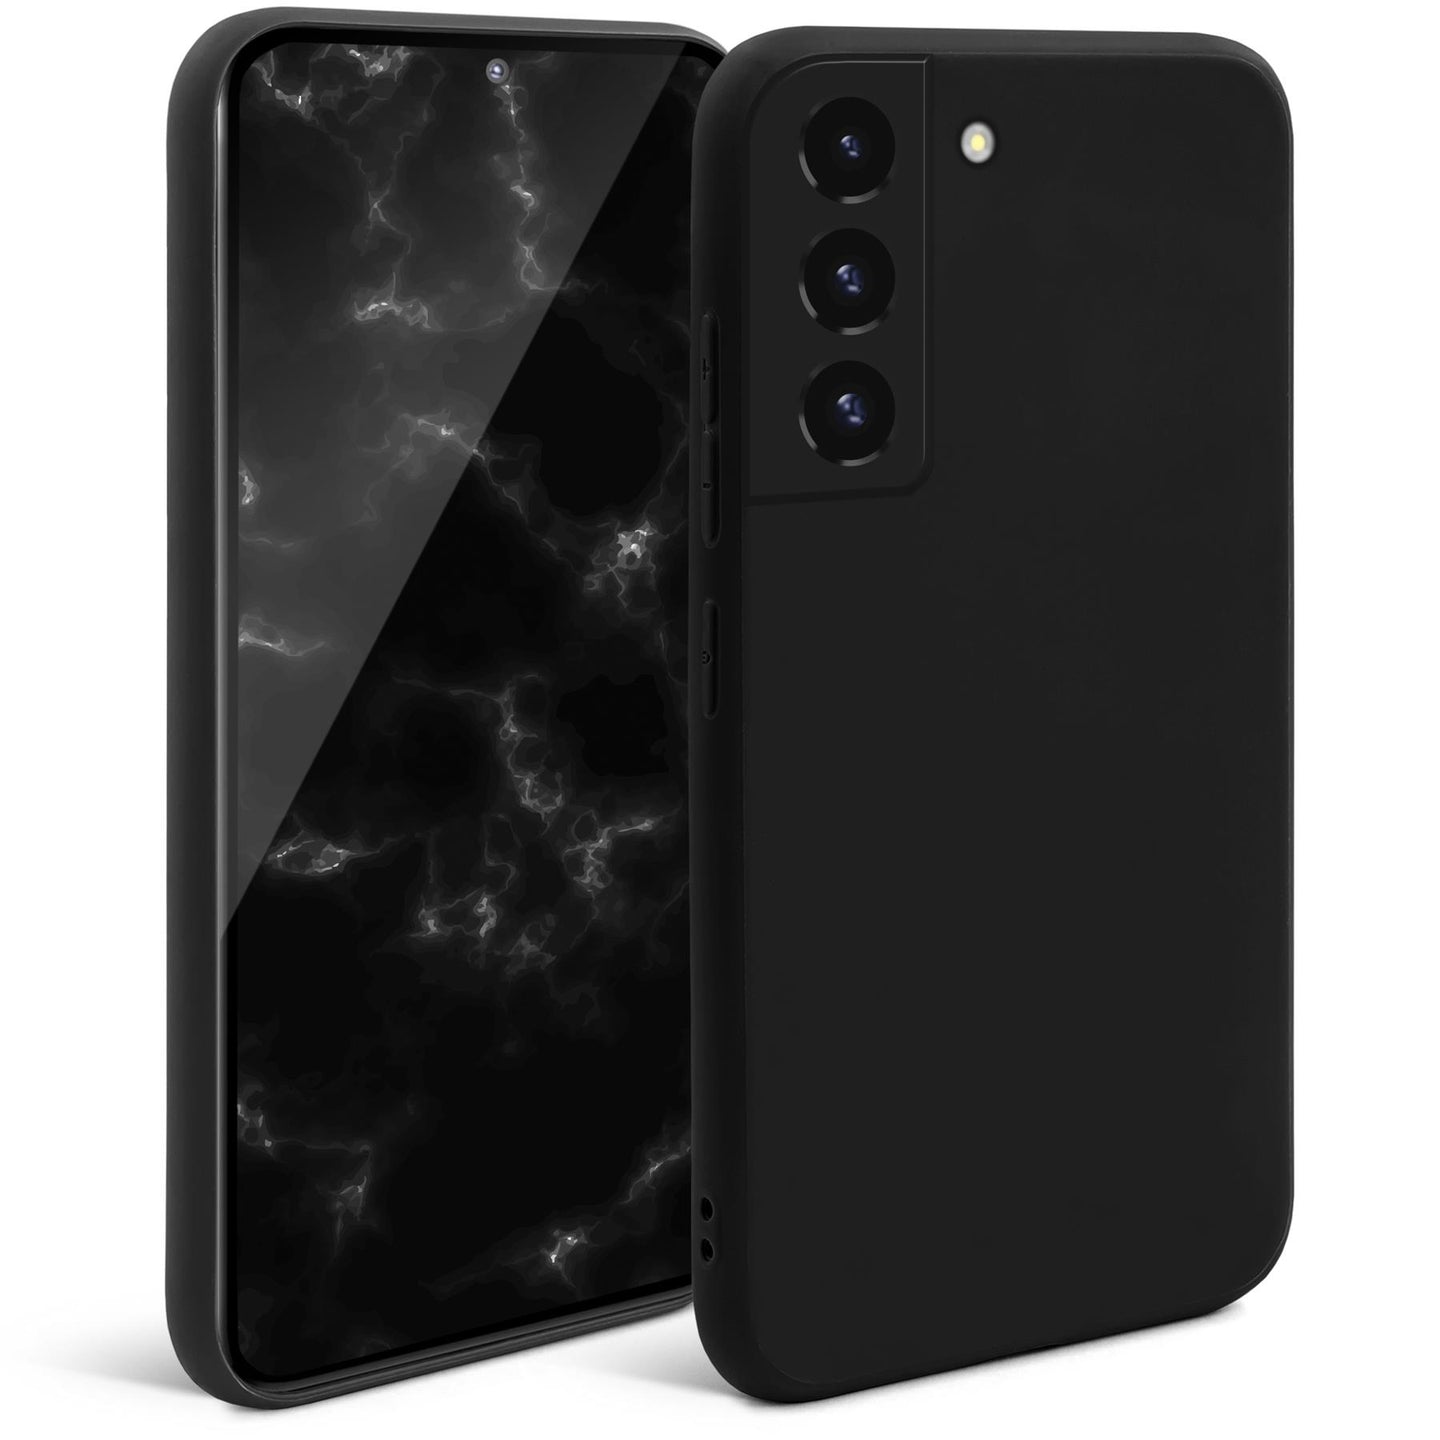 Moozy Minimalist Series Silicone Case for Samsung S22, Black - Matte Finish Lightweight Mobile Phone Case Slim Soft Protective TPU Cover with Matte Surface